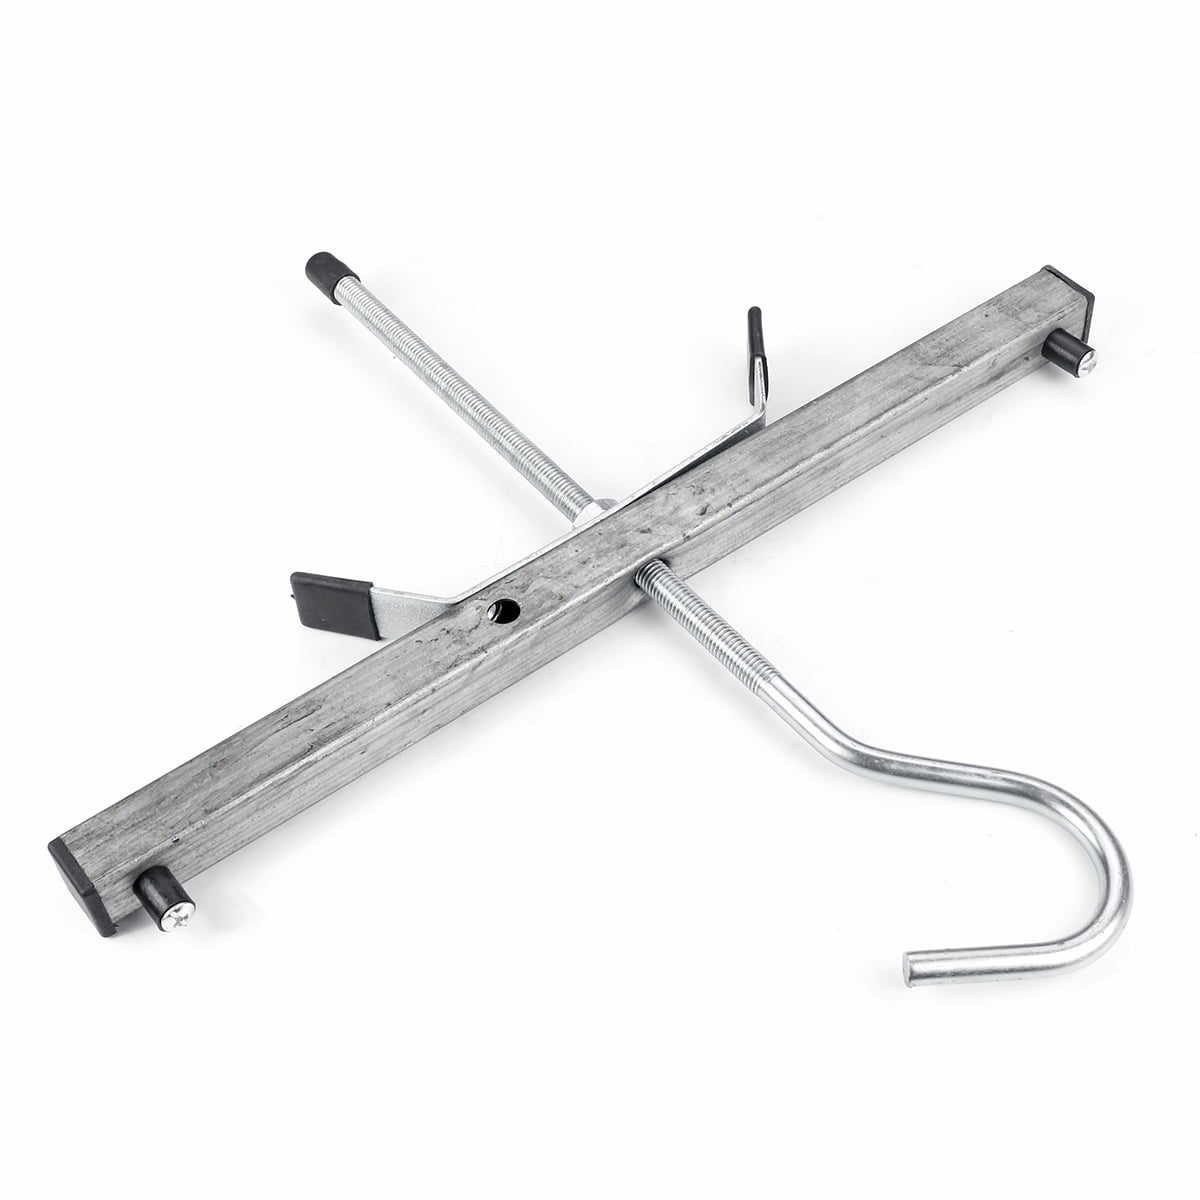 Heavy Duty Locking Ladder Clamps Securing upto 3 Ladders to Car Roof Racks 